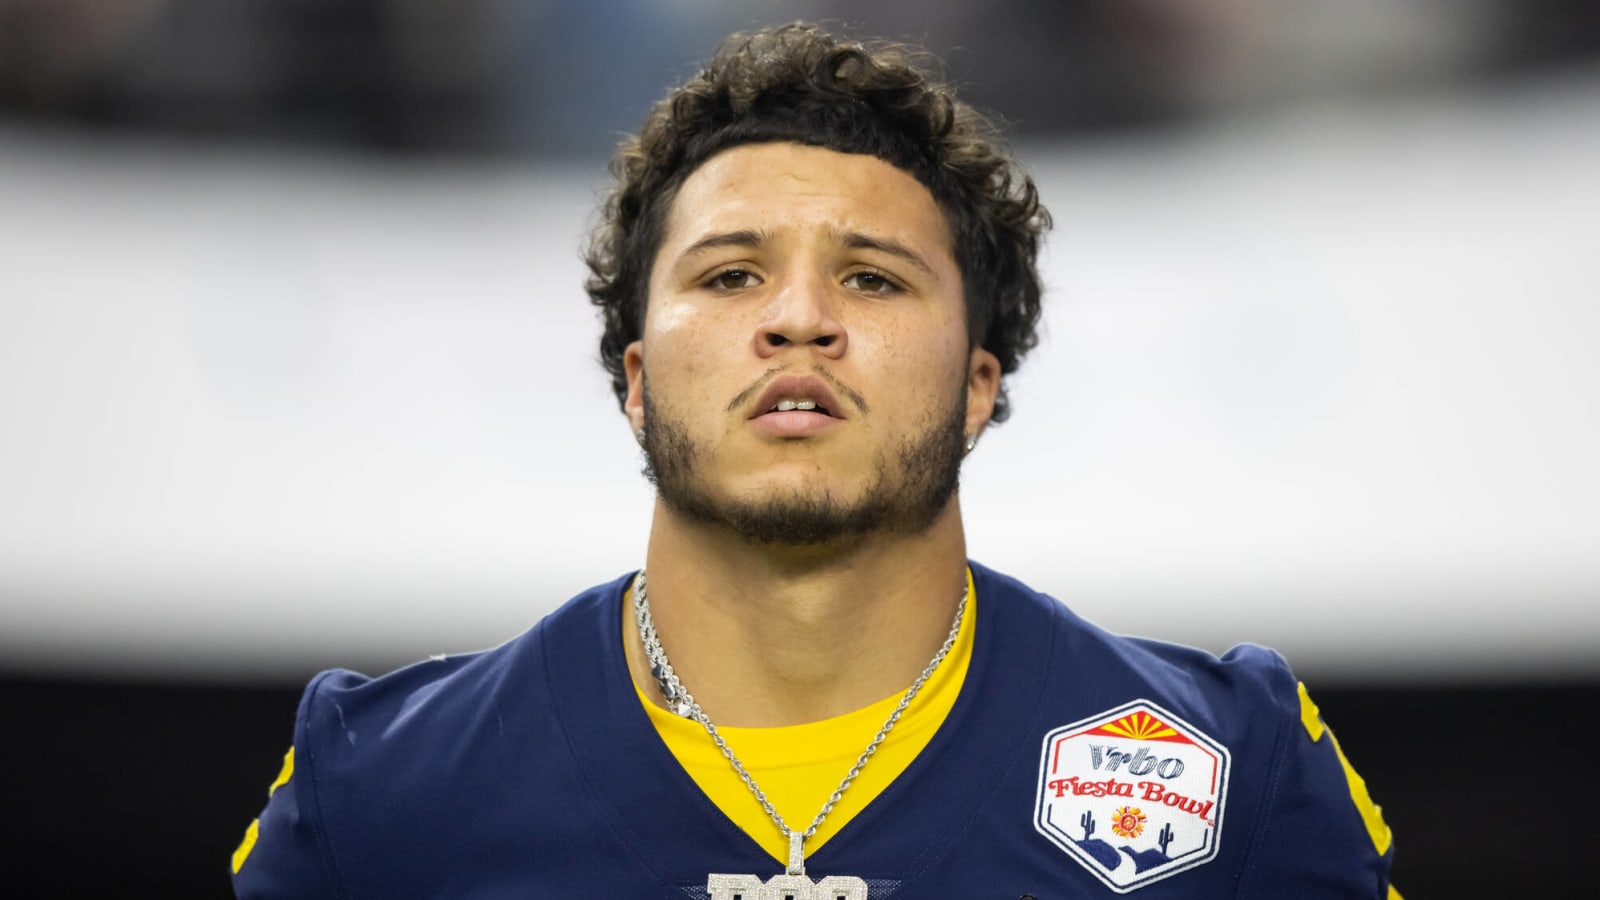 Michigan star makes big announcement about NFL Draft